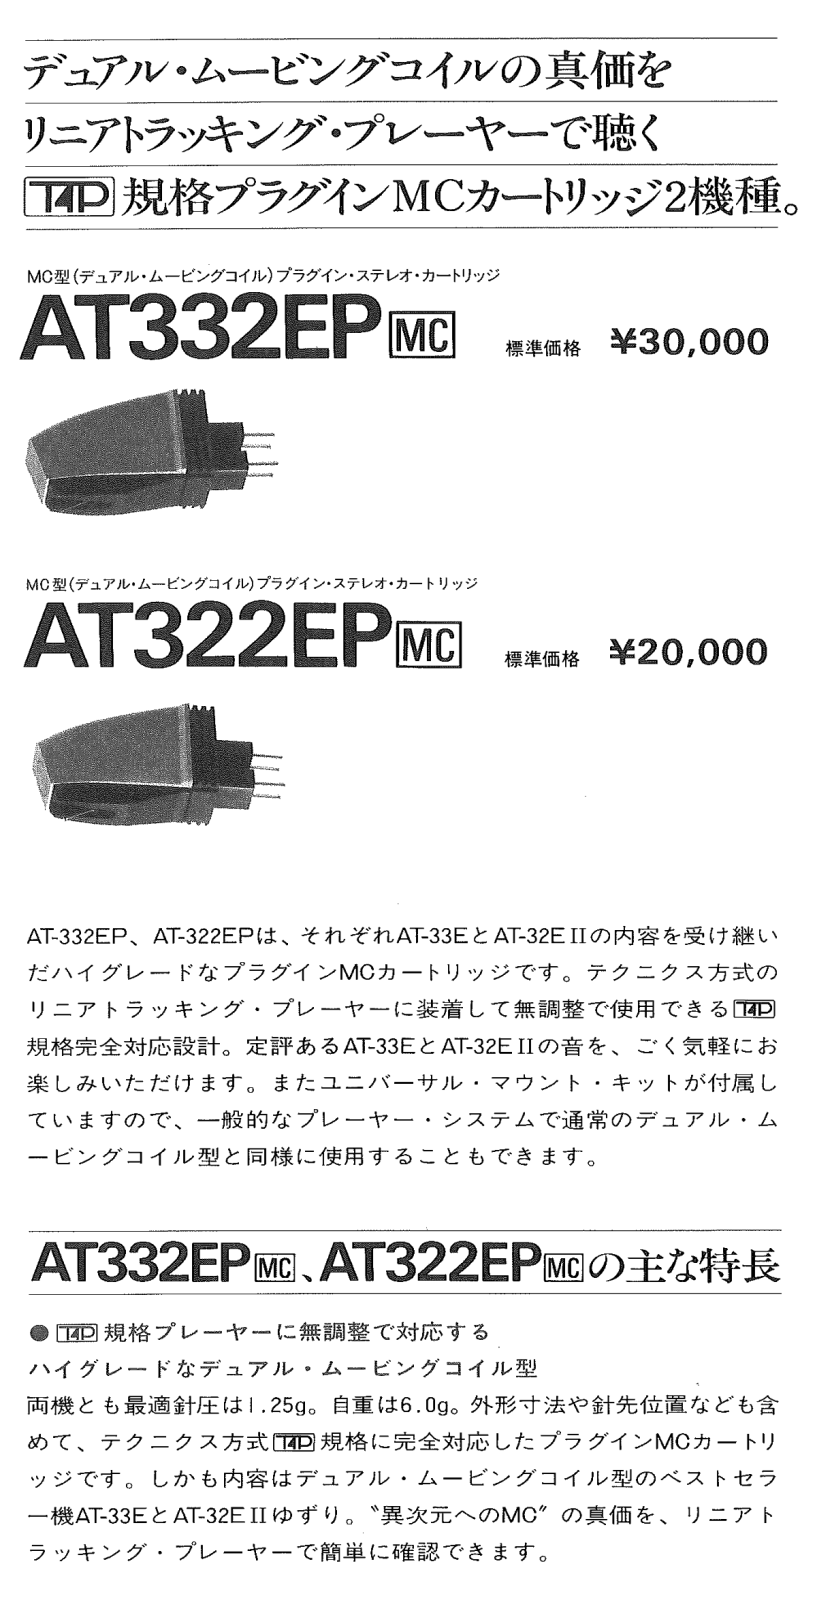 Audio Technica AT-322-EP, AT-332-EP Owners manual